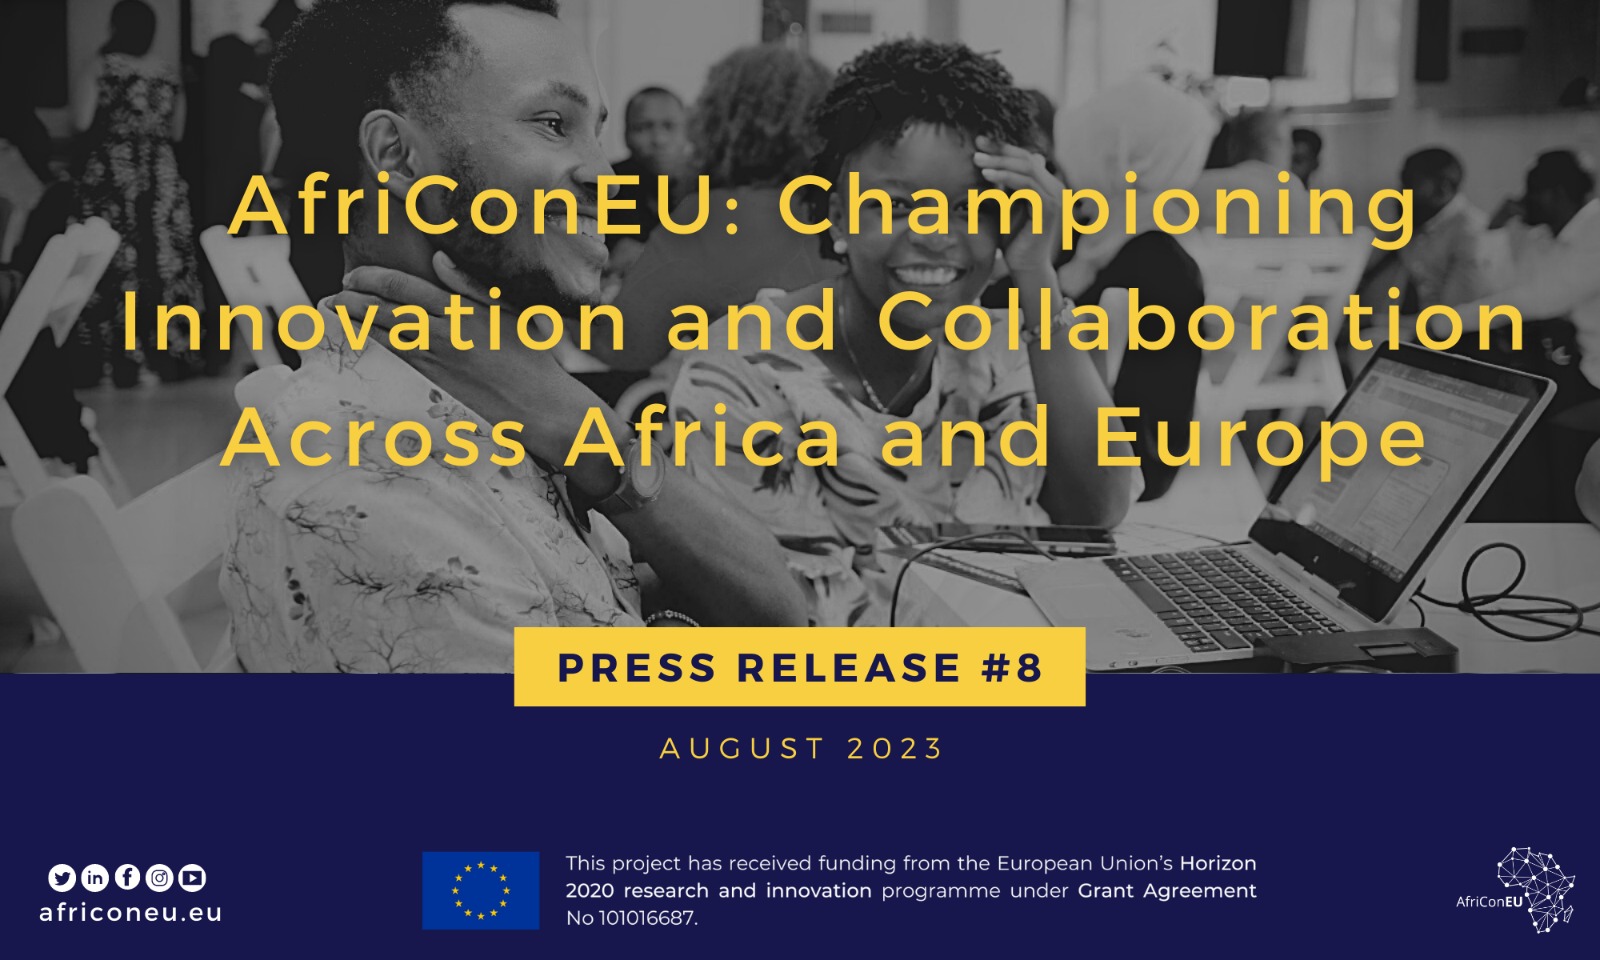 AfriConEU: Championing Innovation and Collaboration Across Africa and Europe